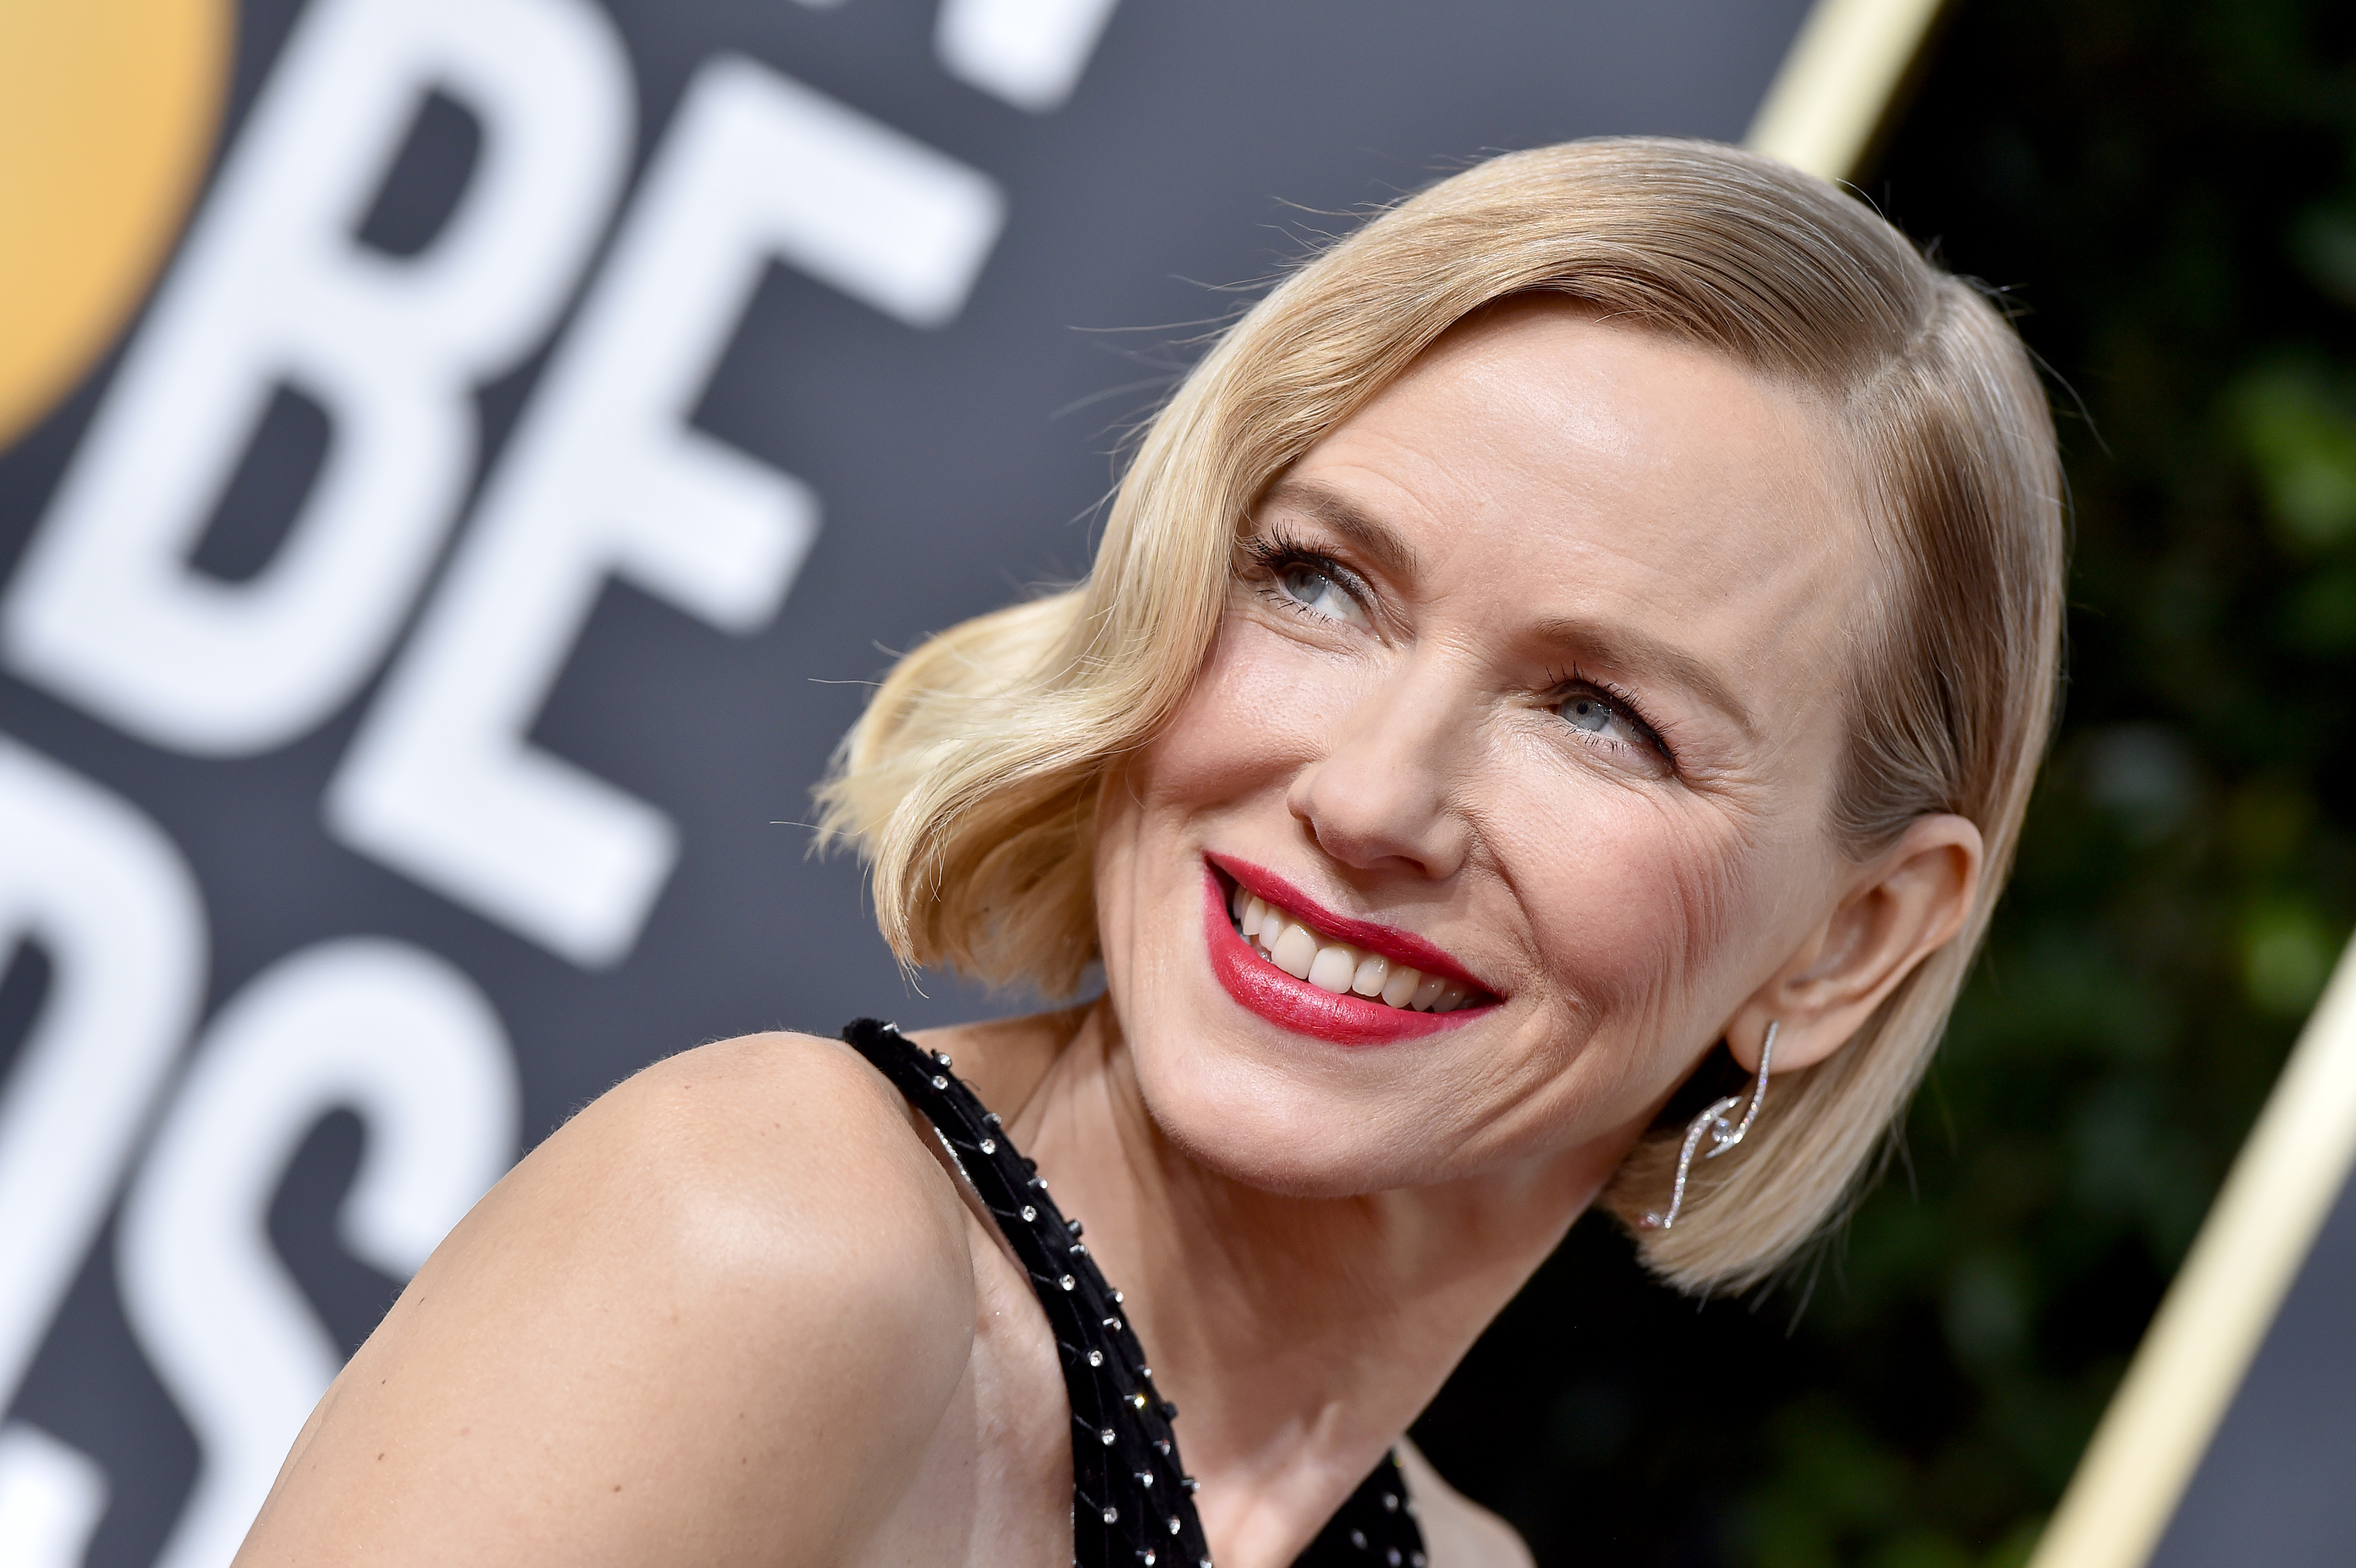 BEVERLY HILLS, CALIFORNIA - JANUARY 05: Naomi Watts attends the 77th Annual Golden Globe Awards at The Beverly Hilton Hotel on January 05, 2020 in Beverly Hills, California. (Photo by Axelle/Bauer-Griffin/FilmMagic)